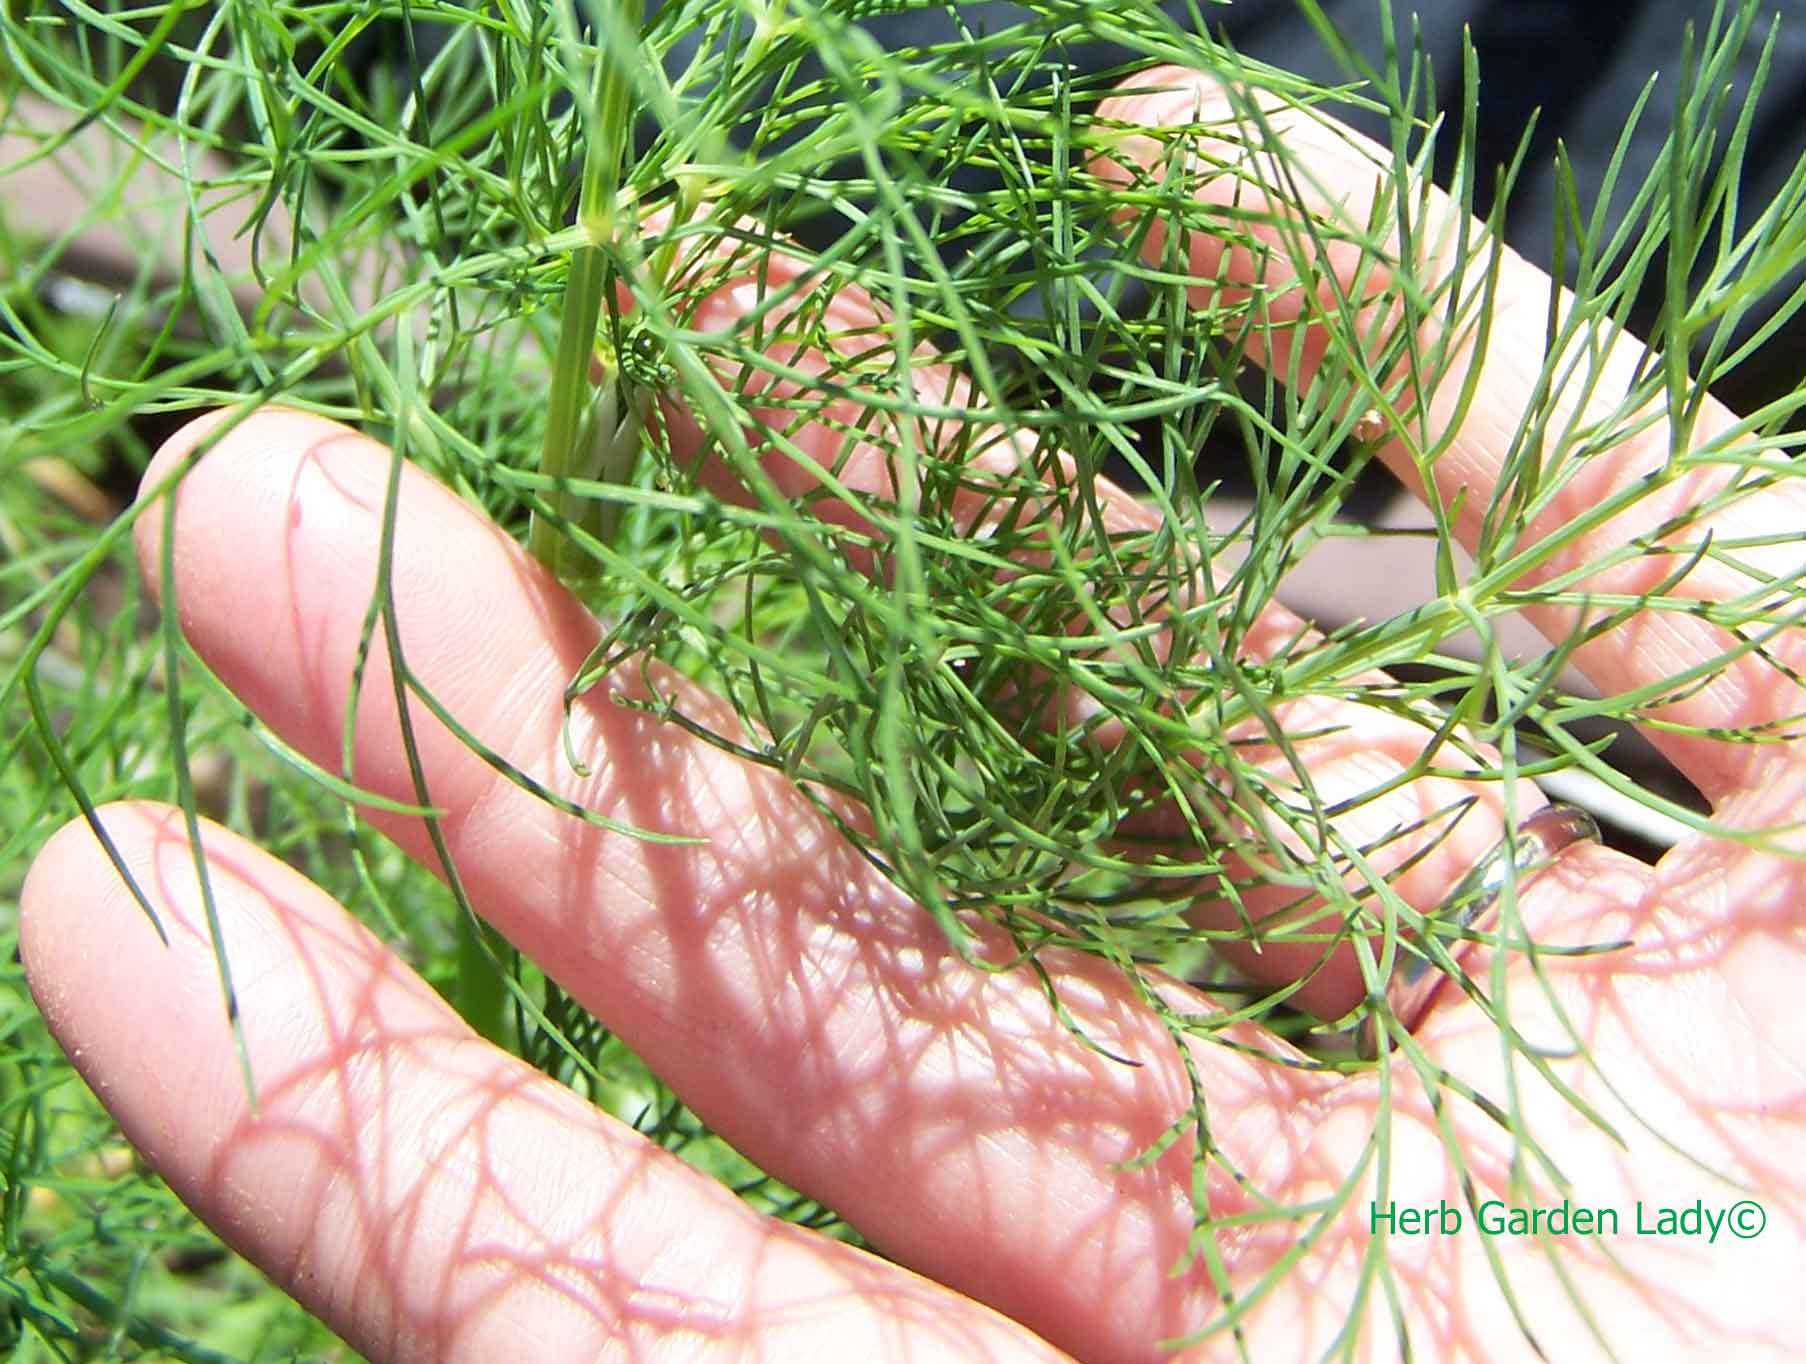 Dill weed is excellent herb to grow in a culinary herb garden, one of the must have herbs to grow each year. They self seed too.